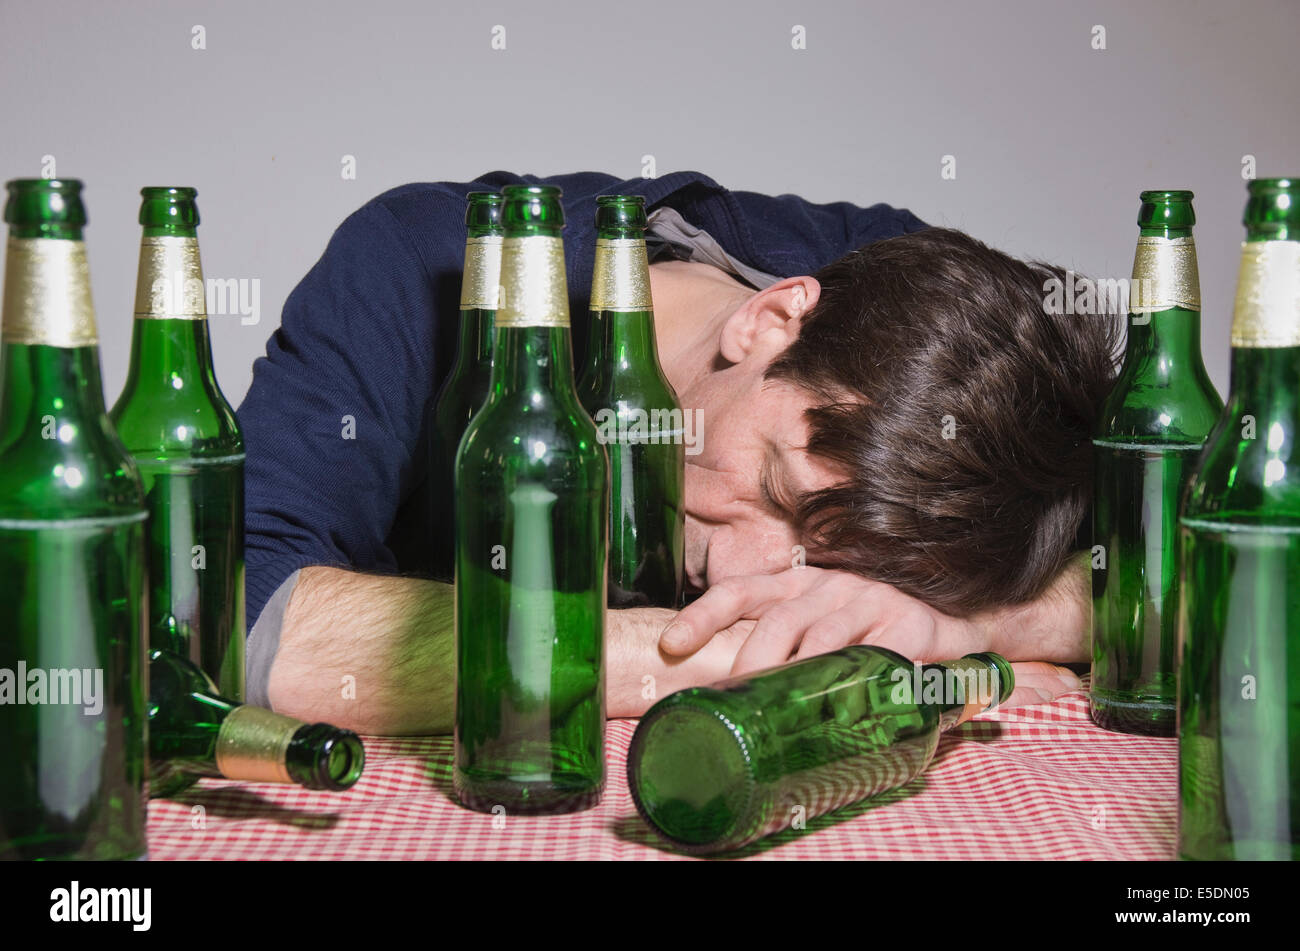 Man lying on table surrounded by beer bottles Stock Photo